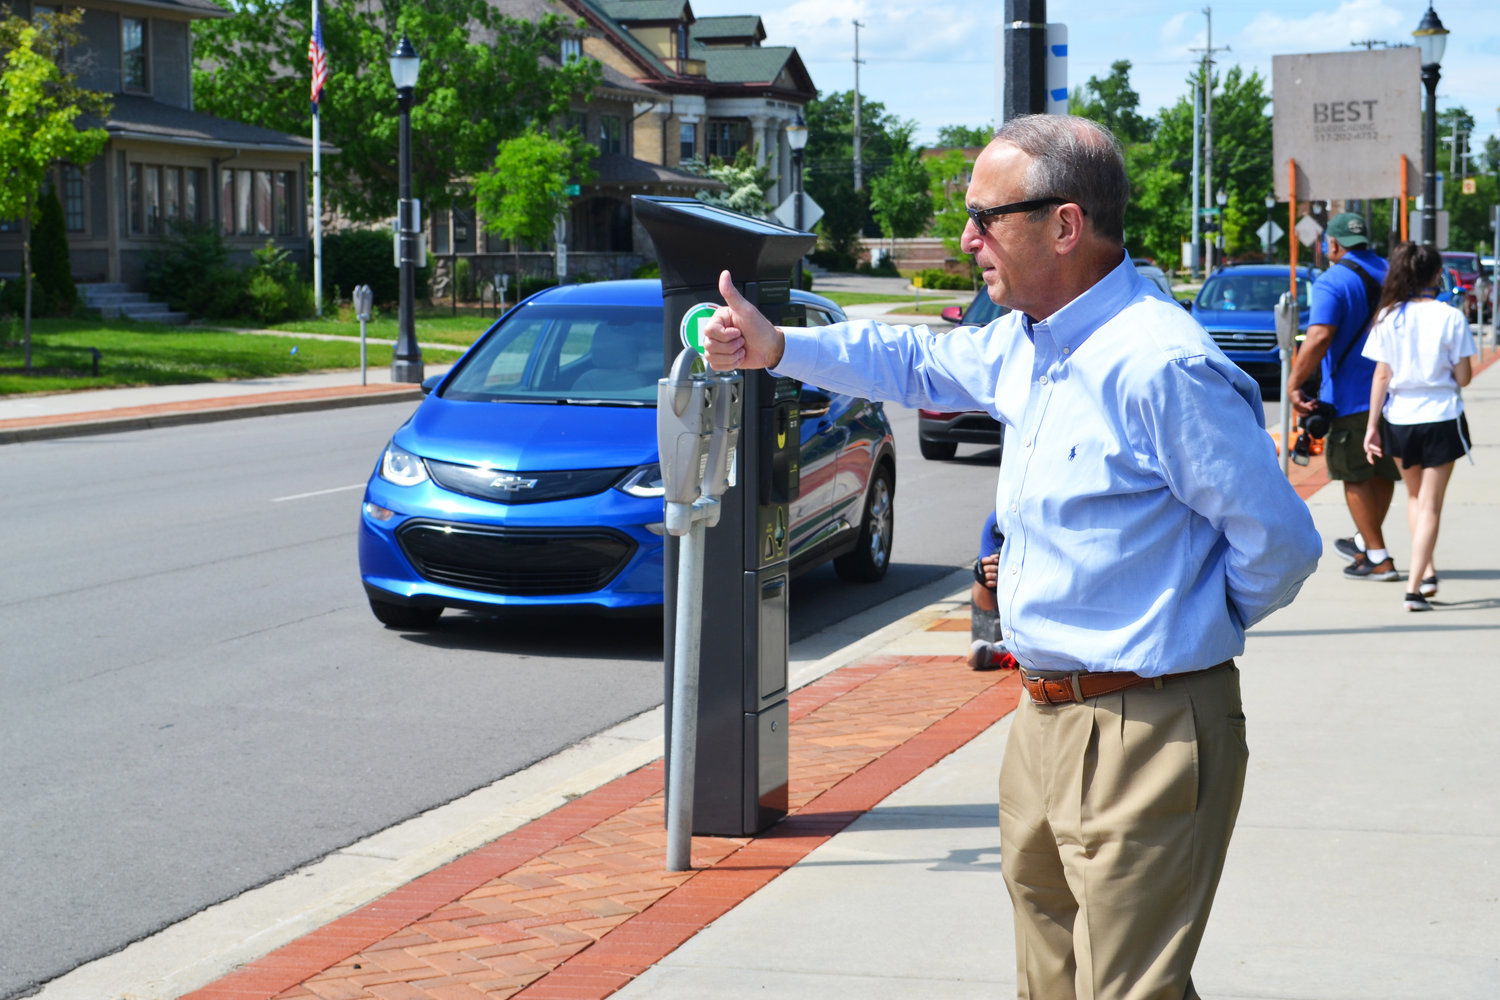 Brent Knight says goodbye to well-wishers during a surprise farewell parade on Capital Avenue in 2020 as he ended 12 years as president of Lansing Community College.